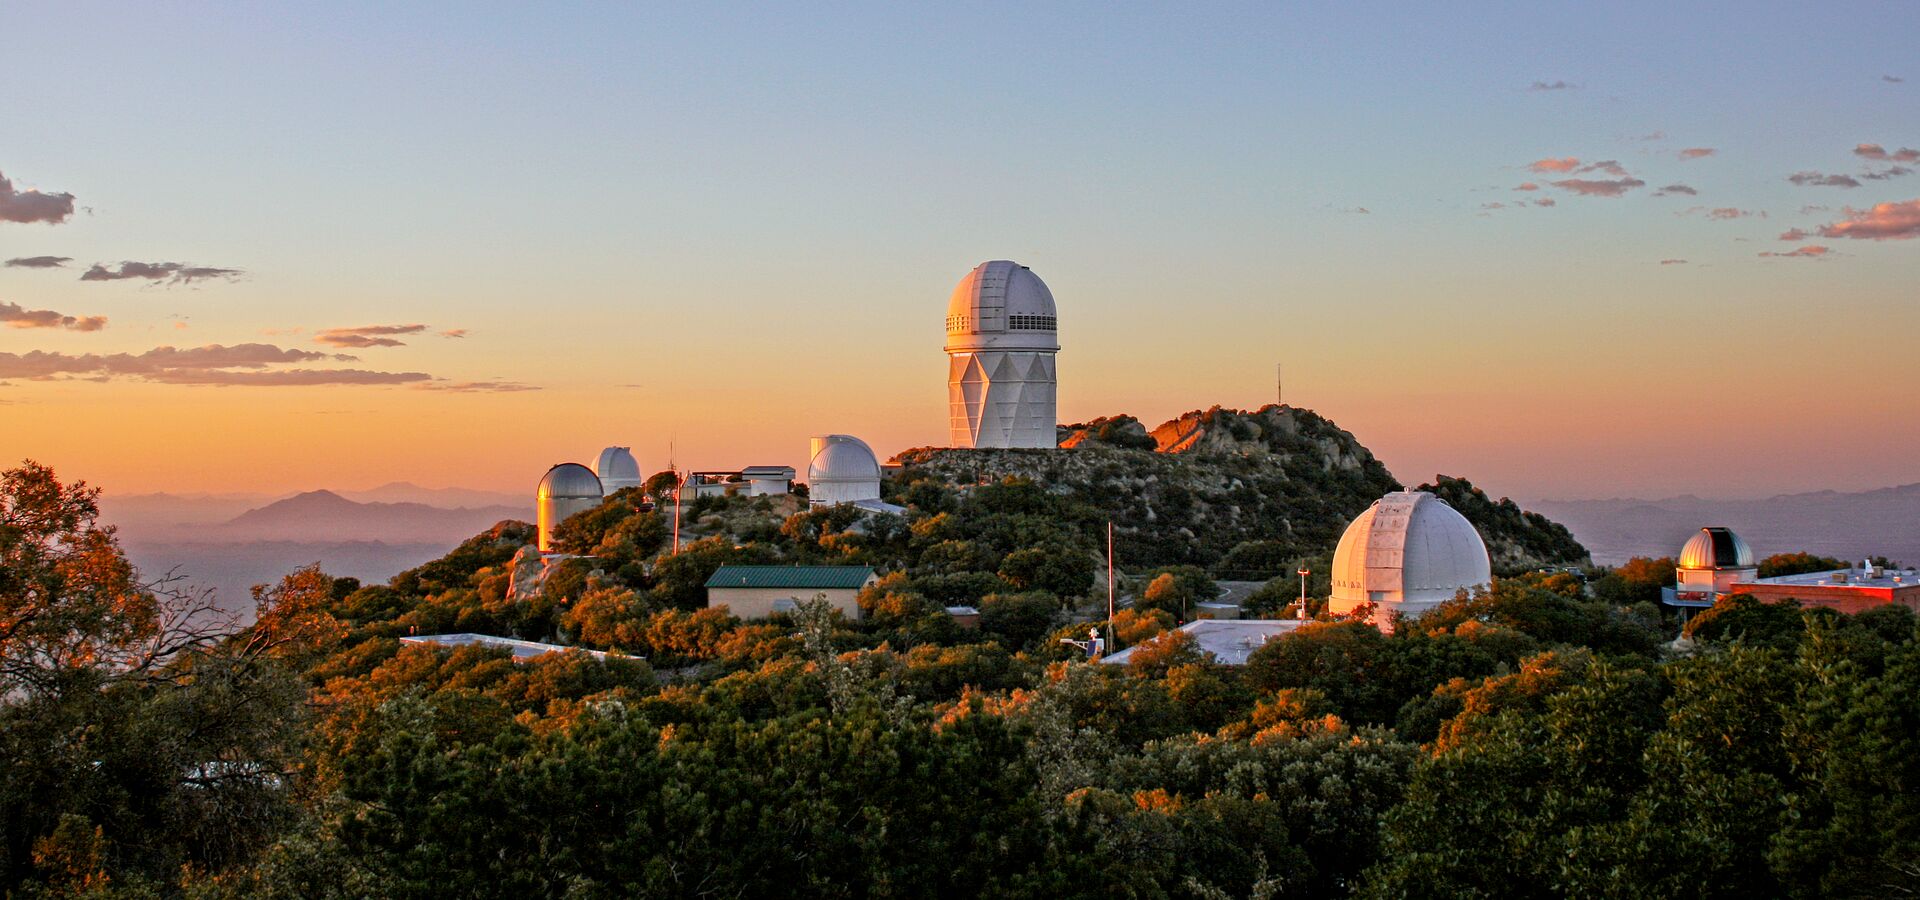 Part of Kitt Peak National Observatory. The Nicholas U. Mayall 4-meter Telescope stands prominently on the highest ridge. This telescope hosts the Dark Energy Spectroscopic Instrument (DESI) which measures the effect of dark energy on the expansion of the Universe.